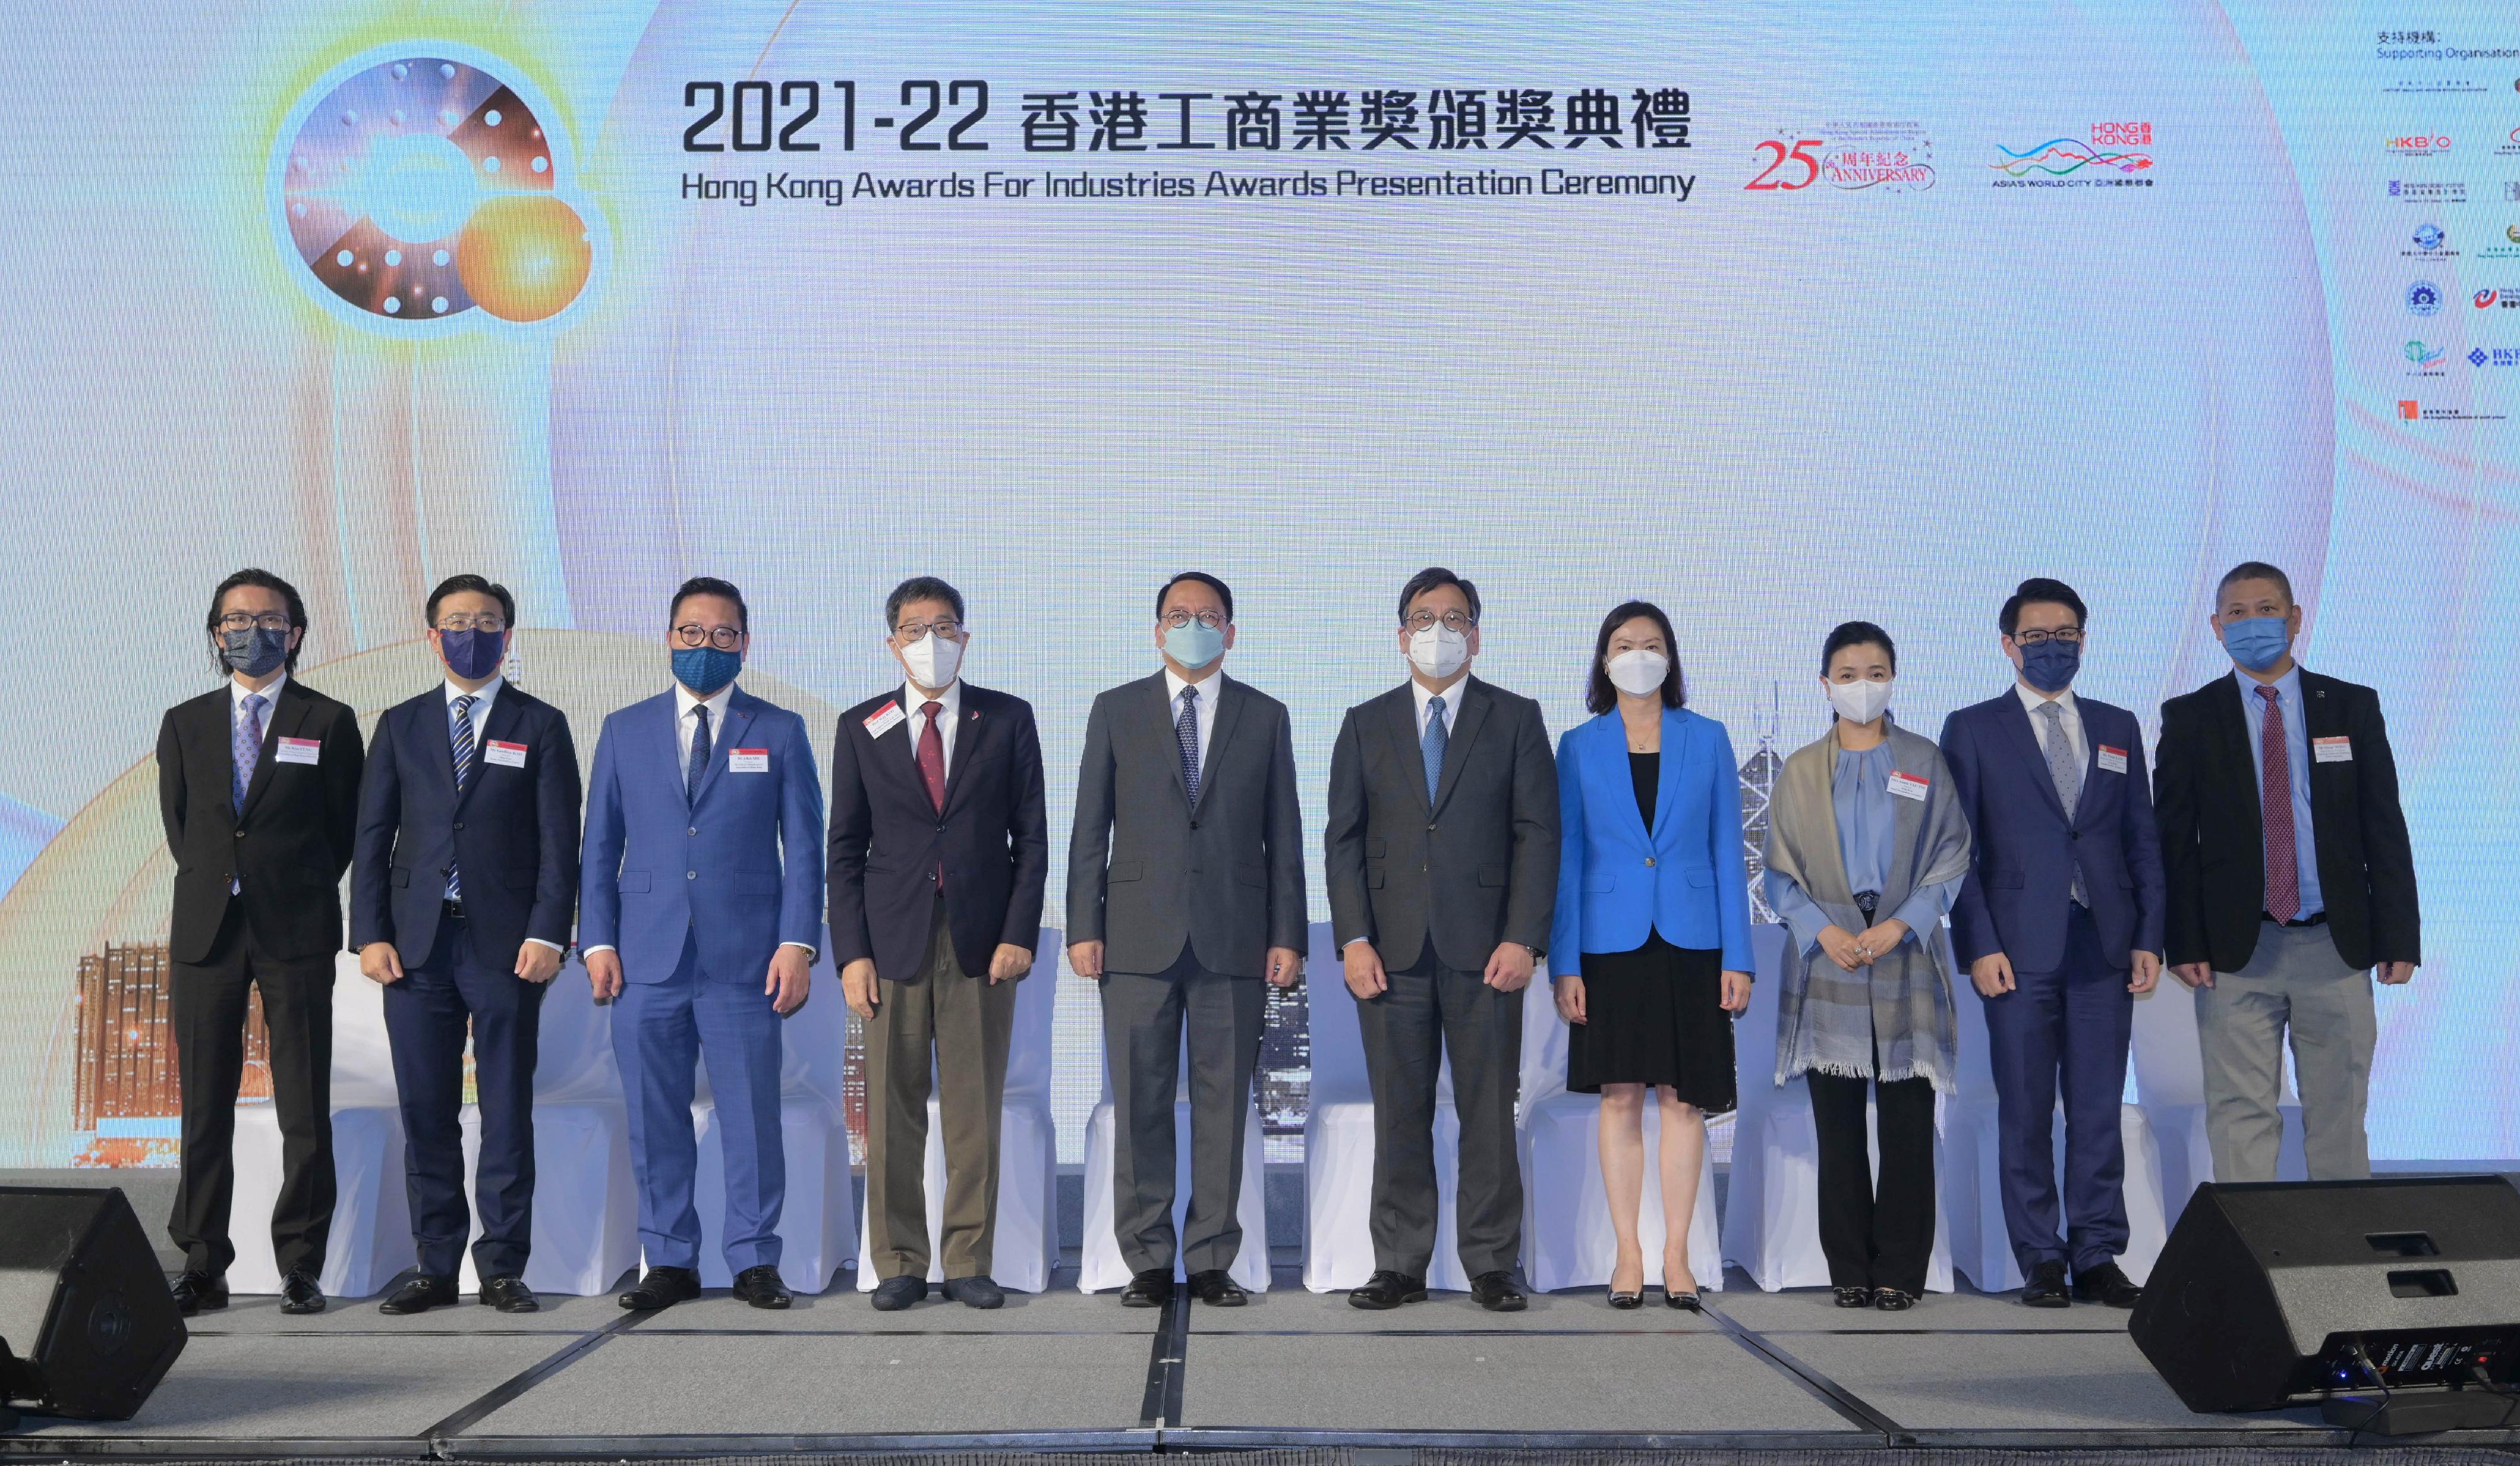 The Chief Secretary for Administration, Mr Chan Kwok-ki, attended the 2021-22 Hong Kong Awards for Industries Awards Presentation Ceremony today (November 28). Photo shows (from left) the Chairman of the Design Council of Hong Kong, Mr Ken Fung; the President of the Hong Kong Young Industrialists Council, Mr Geoffrey Kao; the President of the Chinese Manufacturers’ Association of Hong Kong, Dr Allen Shi; the Chairman of the Final Judging Panels of the 2021-22 Hong Kong Awards for Industries, Professor Way Kuo; Mr Chan; the Secretary for Commerce and Economic Development, Mr Algernon Yau; the Director-General of Trade and Industry, Ms Maggie Wong; the Chairman of the Hong Kong Retail Management Association, Mrs Annie Tse; the Chairman of the Industry & Technology Committee of the Hong Kong General Chamber of Commerce, Mr Victor Lam; and the Head of Business Development of the Hong Kong Science and Technology Parks Corporation, Mr Oscar Wong.